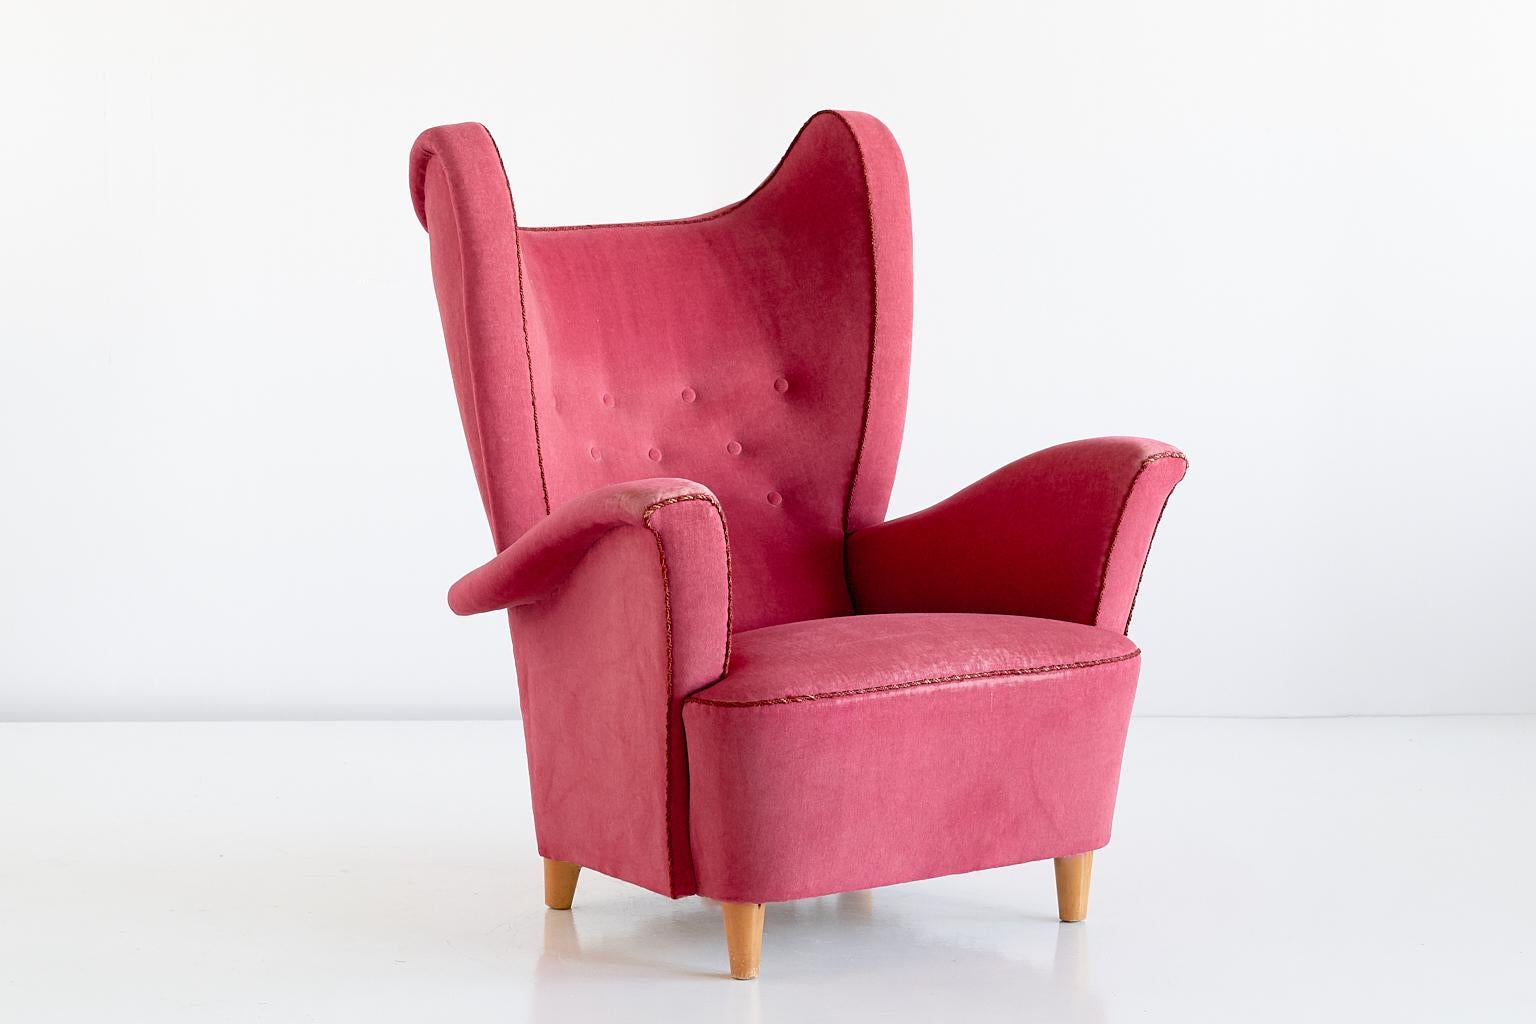 This rare wingback chair was designed by Otto Schulz and produced by Boet in Goteborg, Sweden in the 1940s. The elegant organic lines of the design create a striking silhouette. Its generous proportions and the high back make this a sumptuous and